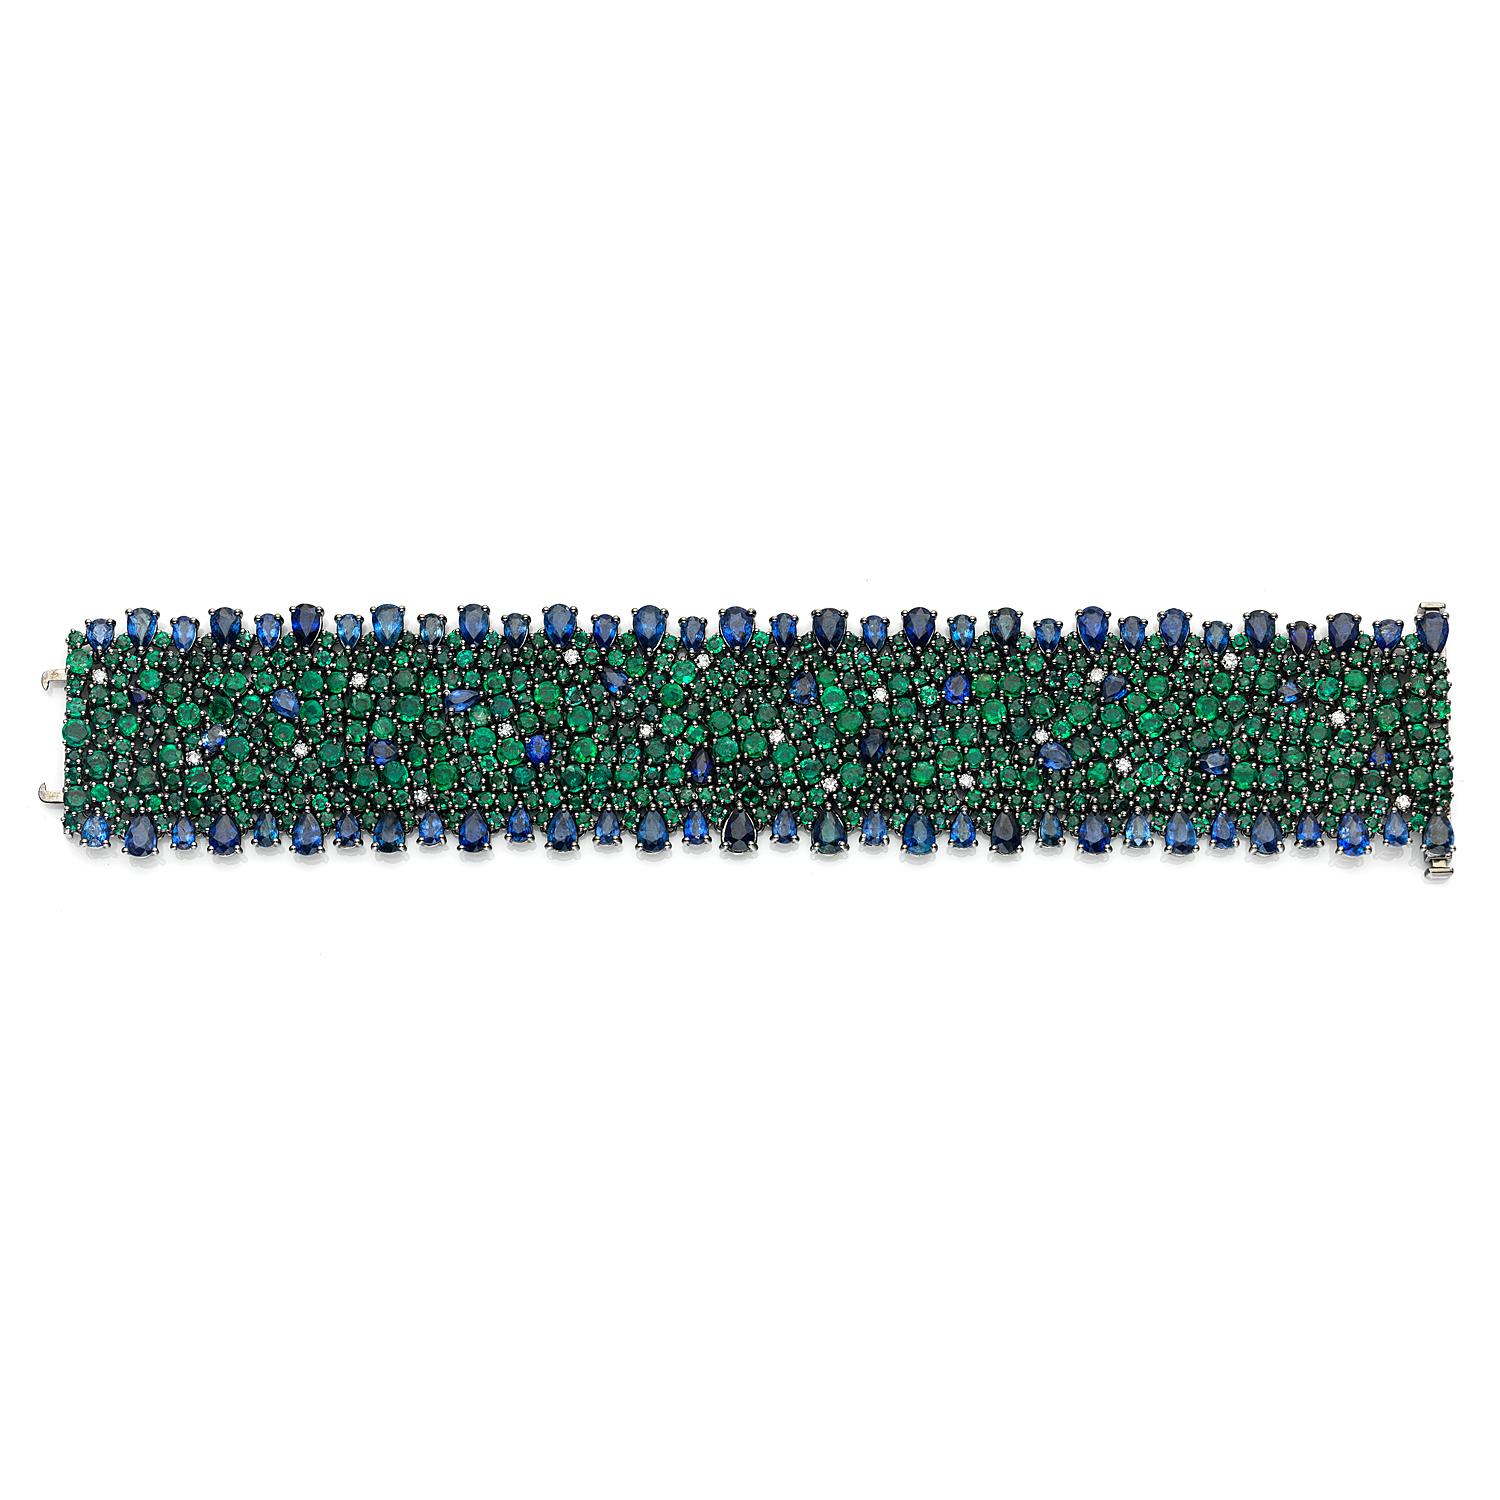 18K Tinted Black Rhodium
Blue Sapphire: 27.43ct total weight.
Emerald: 29.45ct total weight.
Diamonds: 0.57ct total weight.
All diamonds are G-H/SI stones.